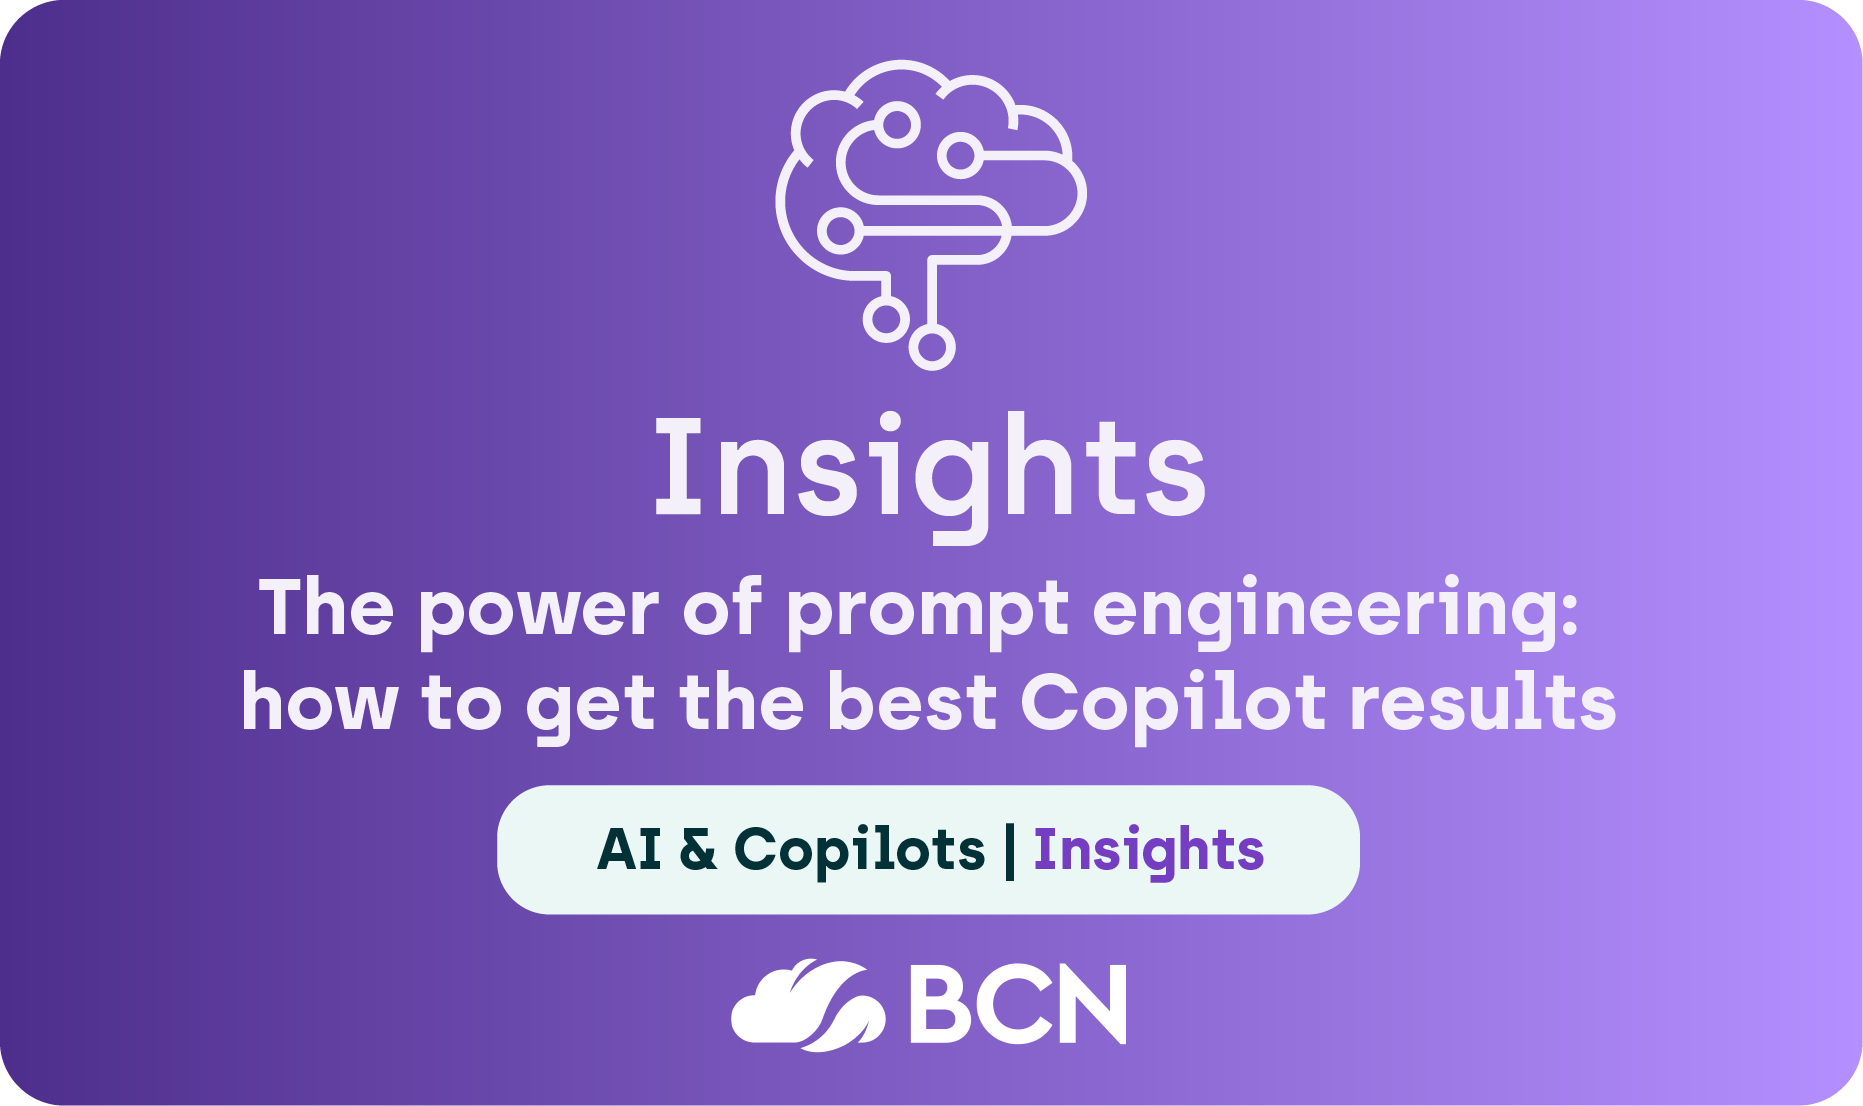 The power of prompt engineering: how to get the best Copilot results